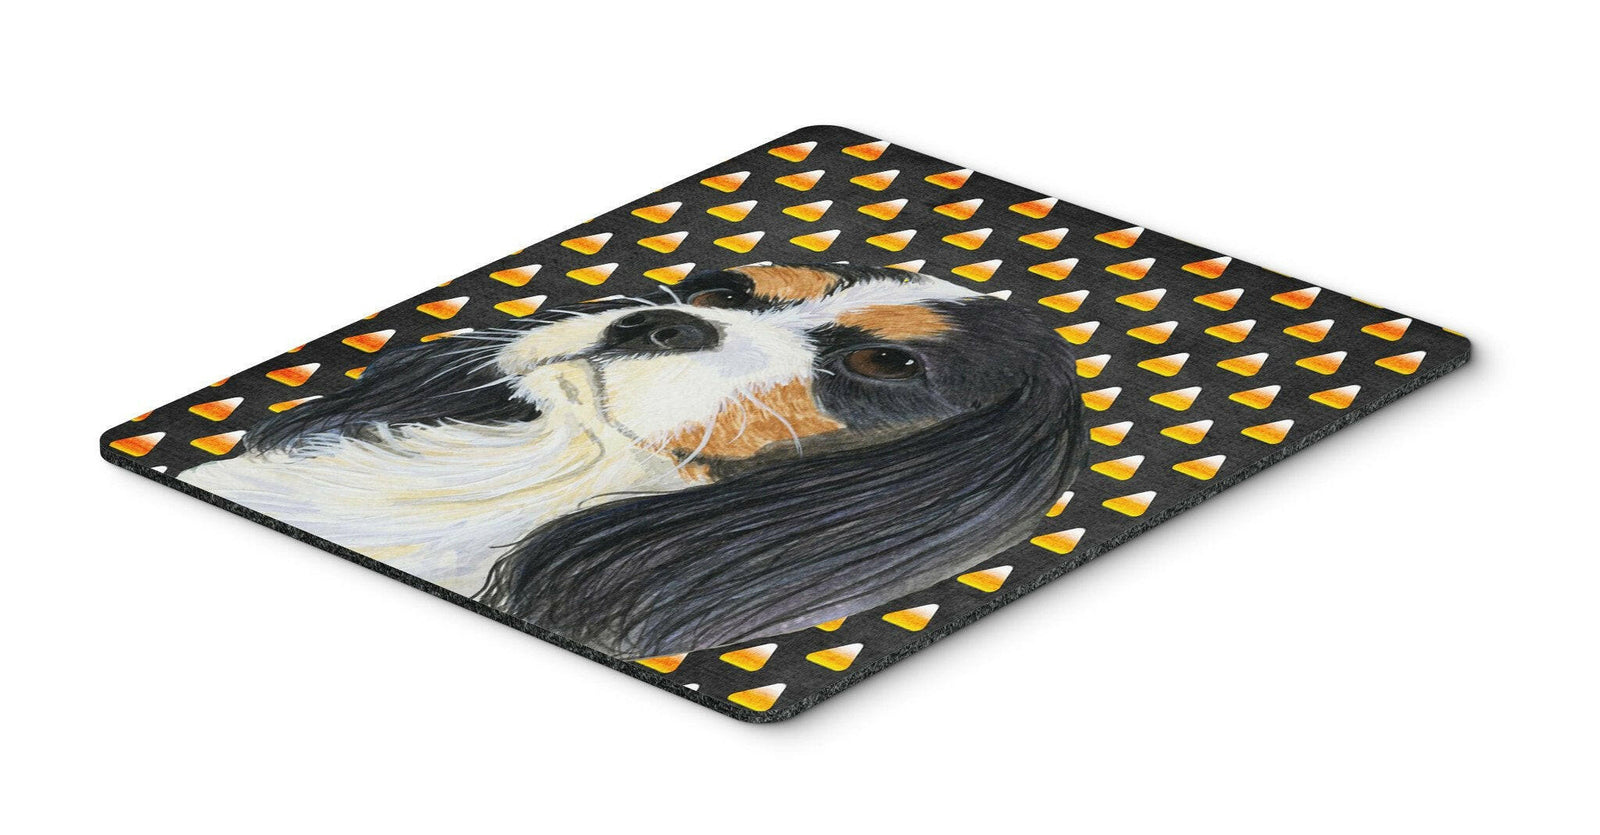 Cavalier Spaniel Tricolor Candy Corn Halloween Mouse Pad, Hot Pad or Trivet by Caroline's Treasures